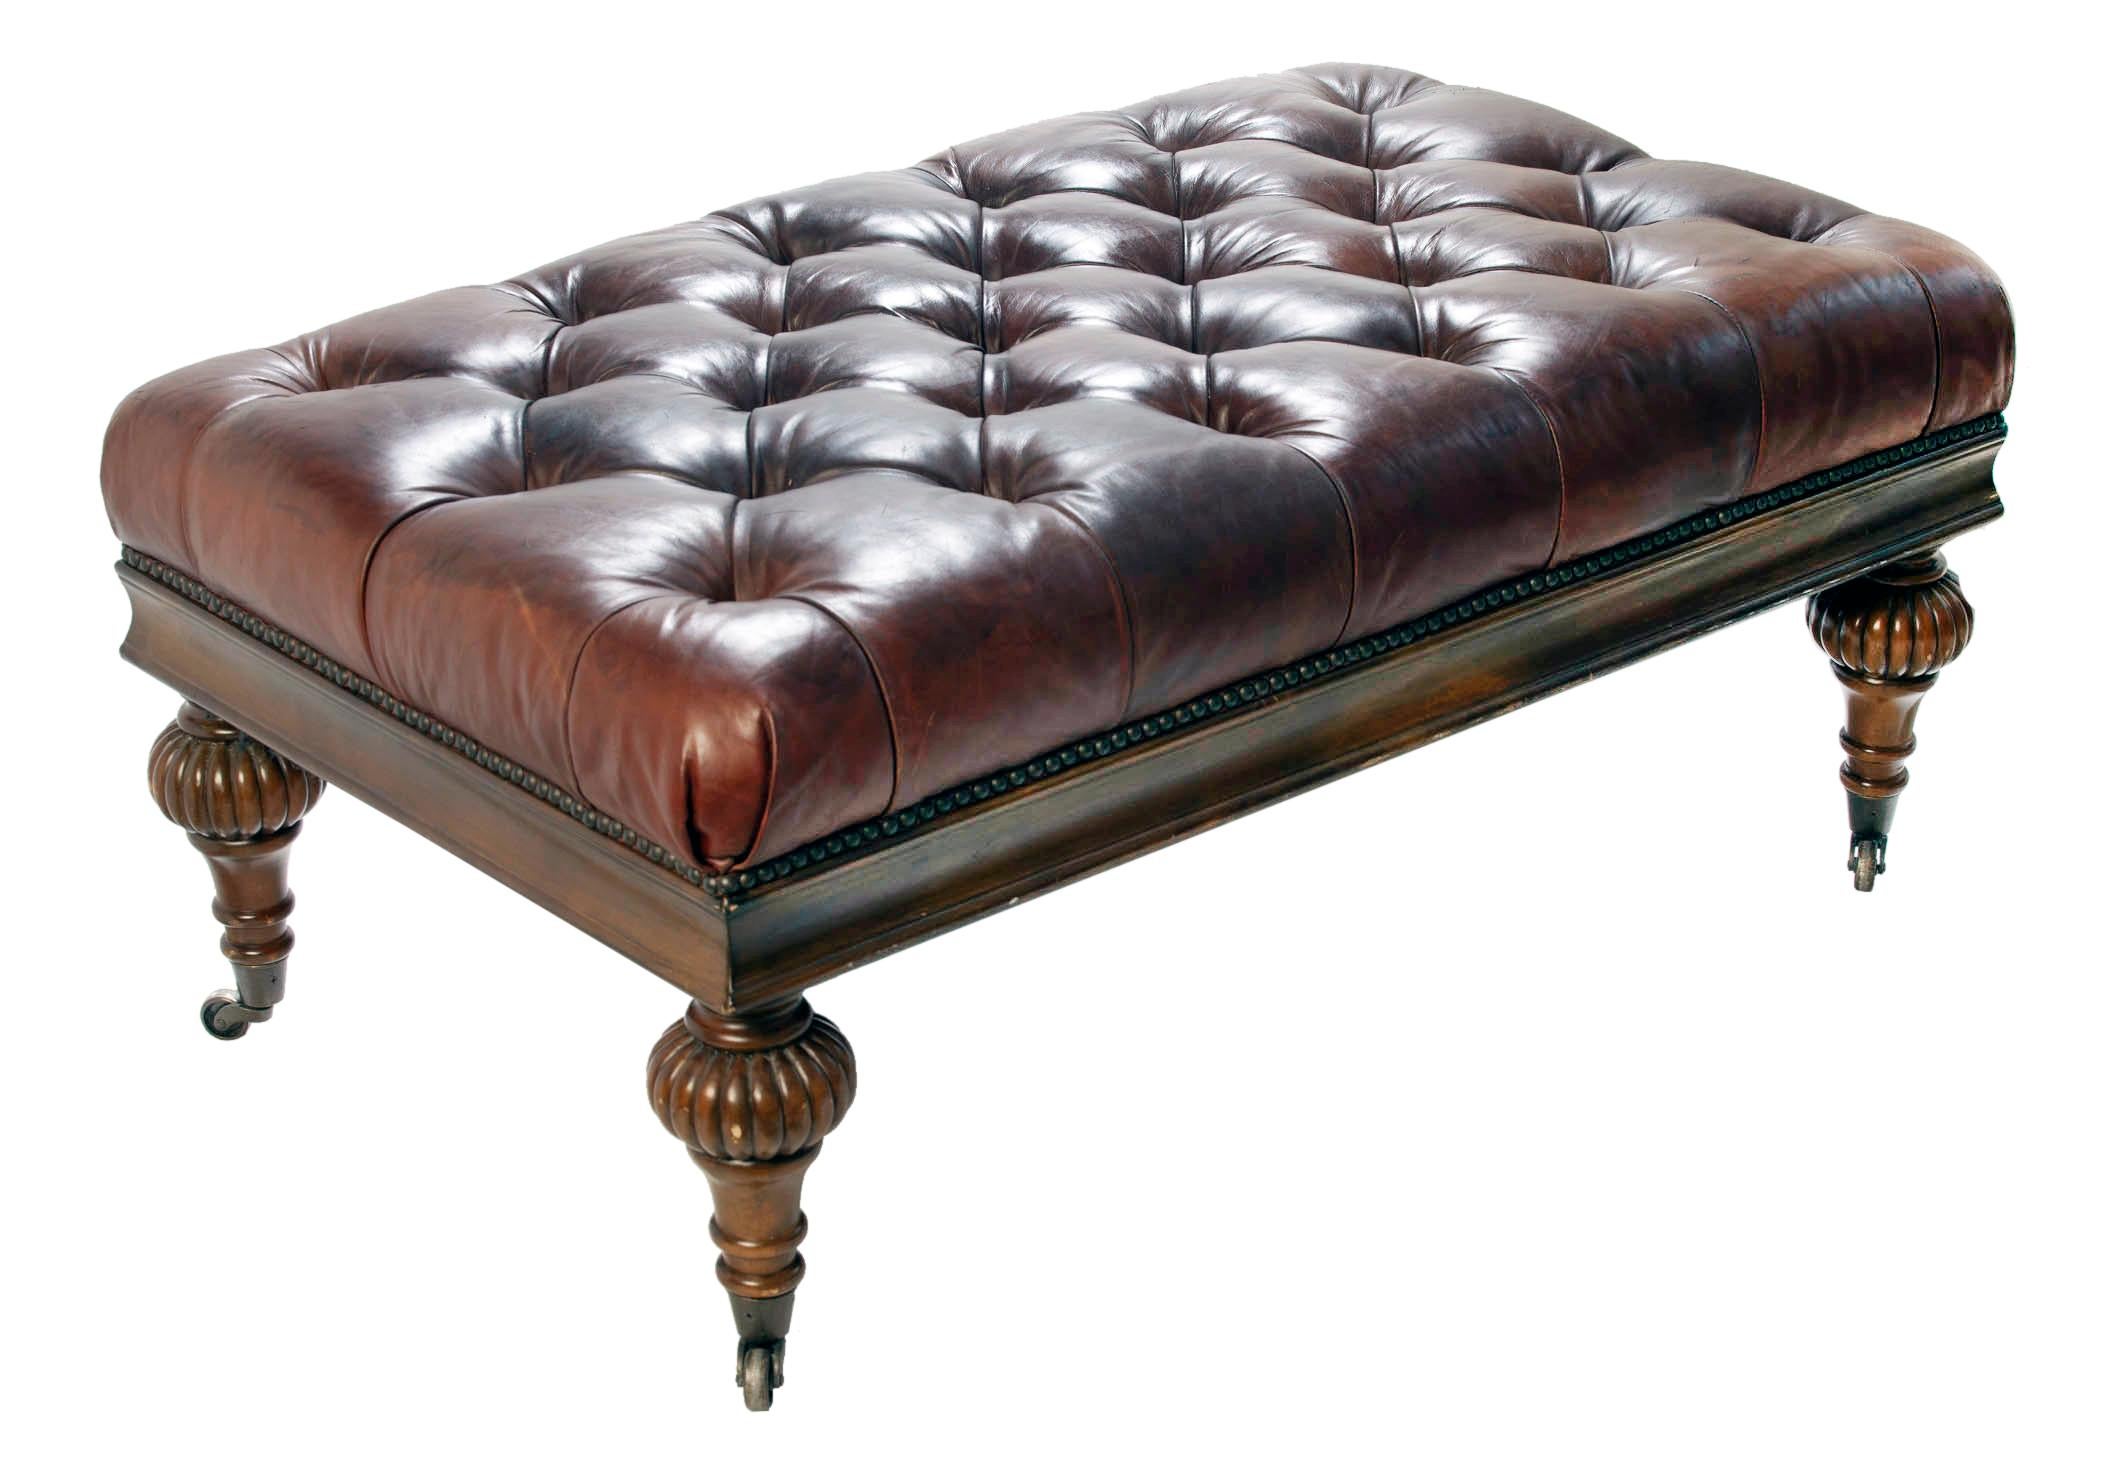 Chesterfield style leather ottoman on traditional turned legs finished with petite brass casters.